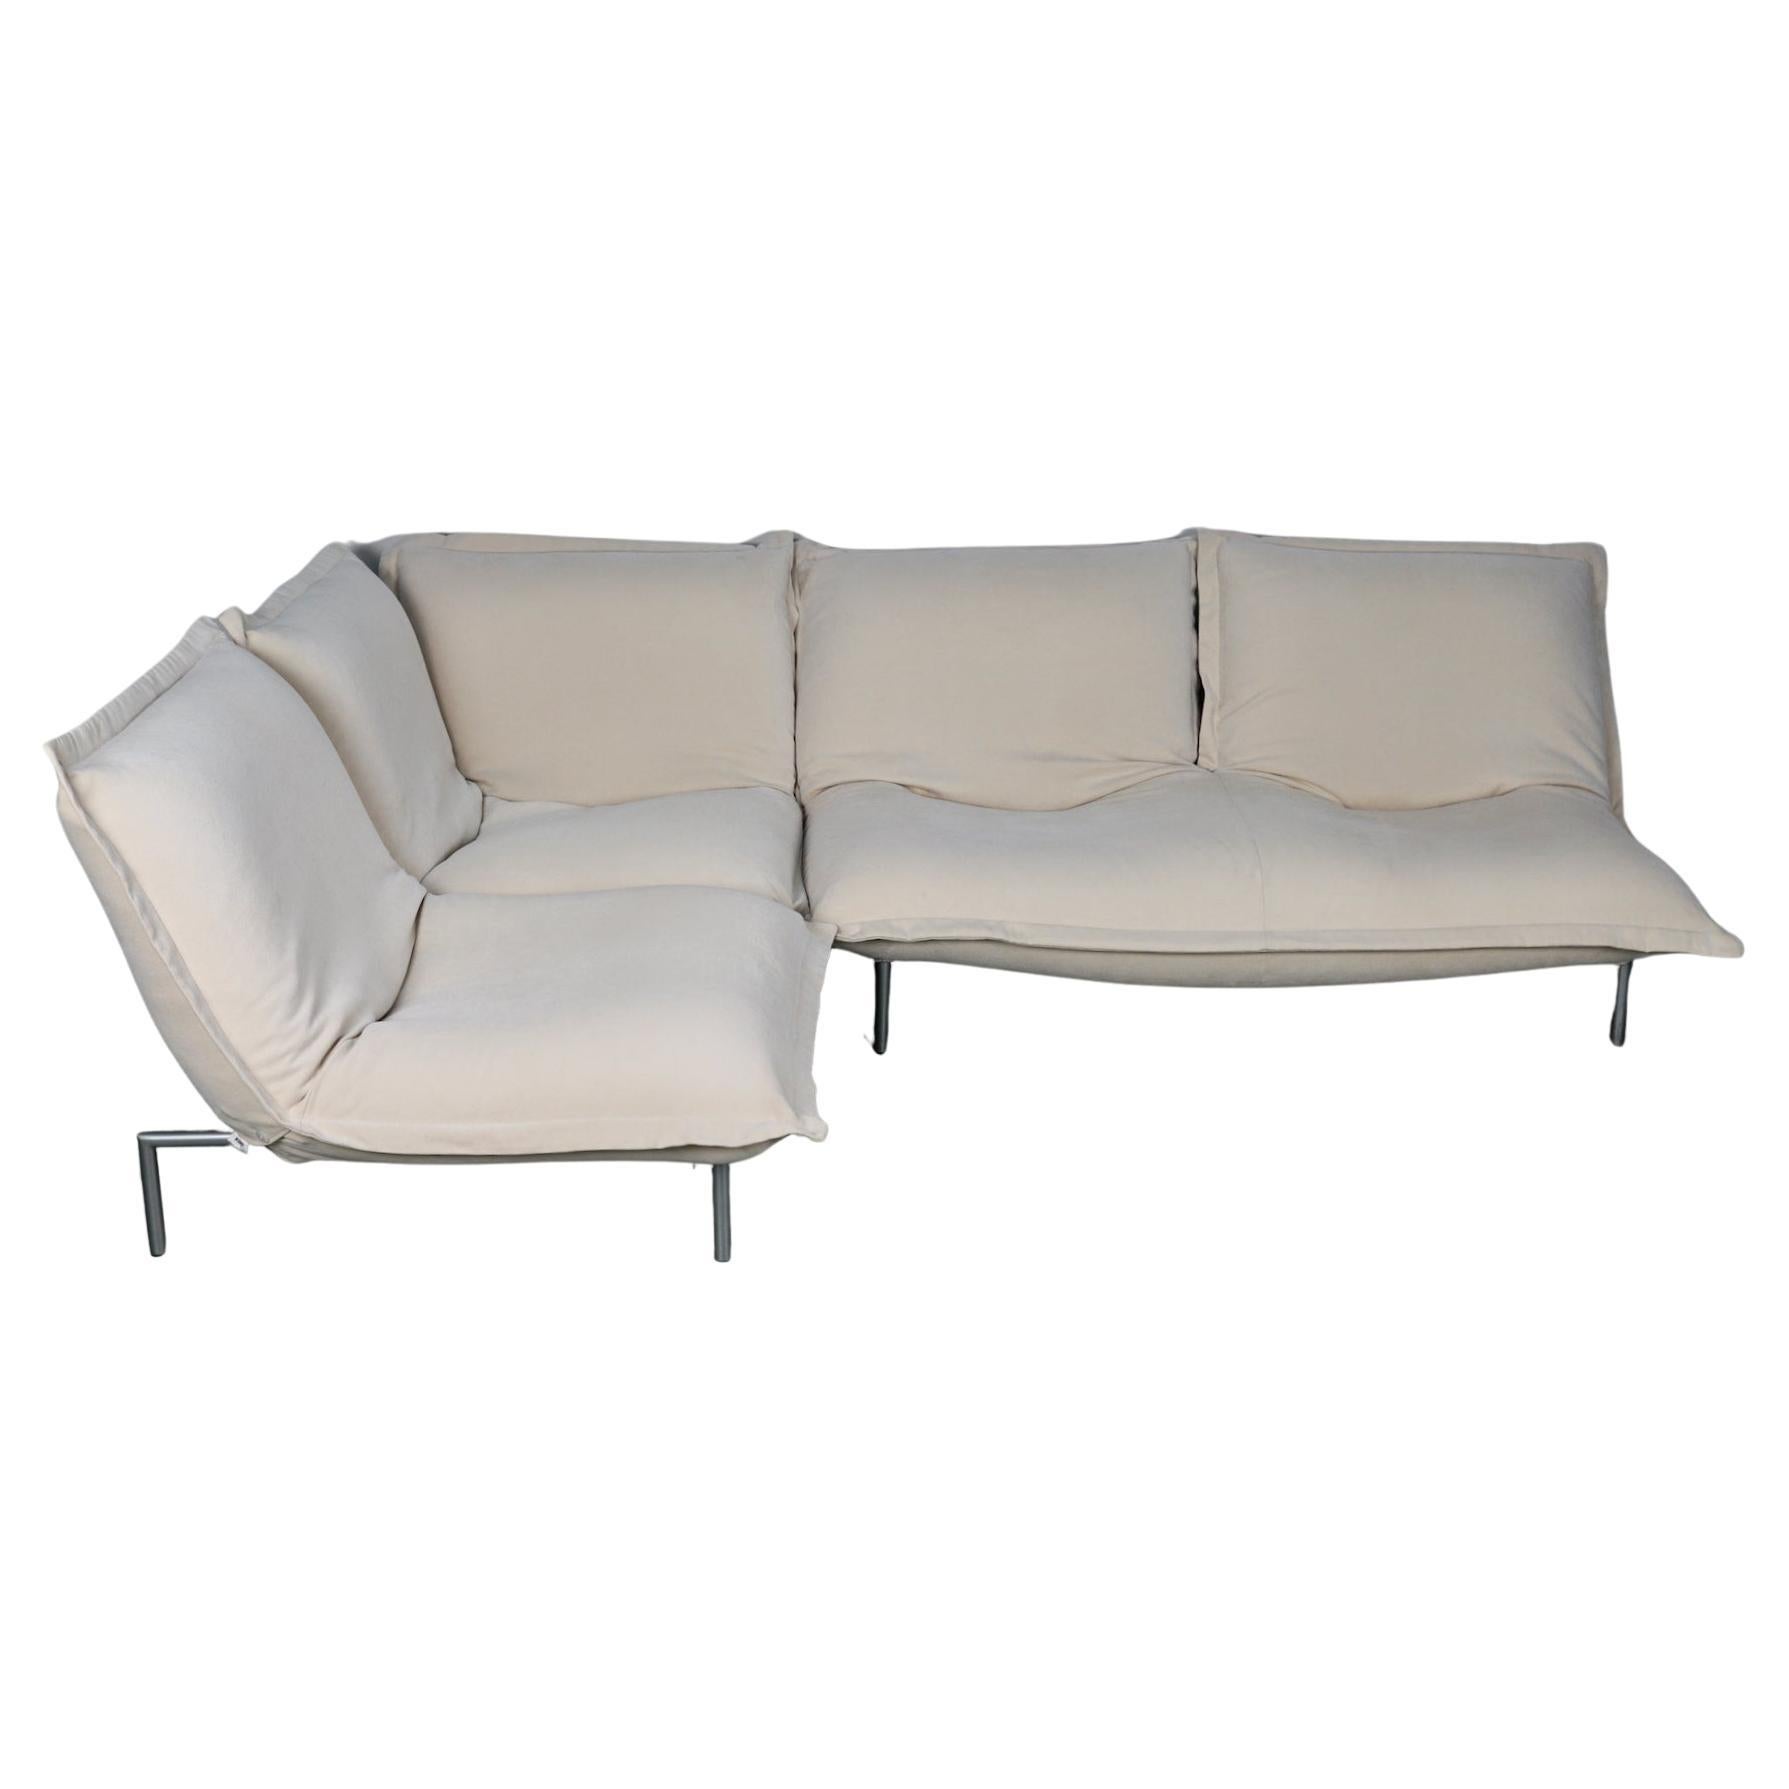 Calin Corner Sofa Set by Pascal Mourgue for Cinna / Ligne Roset - 4 seater For Sale